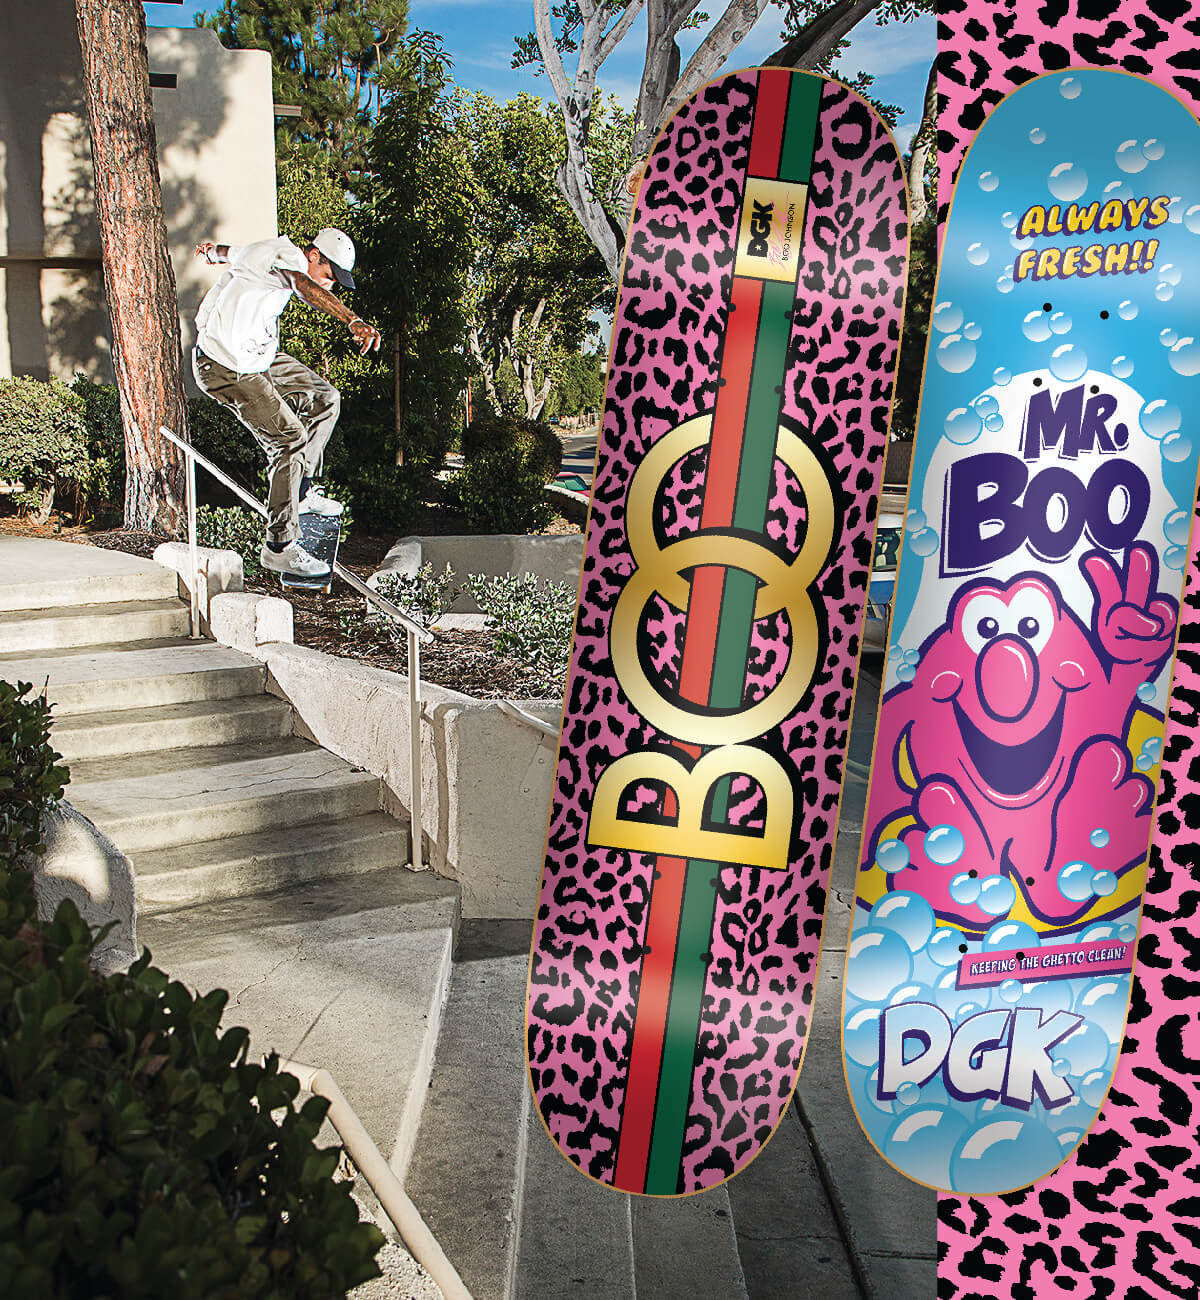 NEW SKATEBOARDS FROM DGK AND MORE - SHOP NEW SKATE